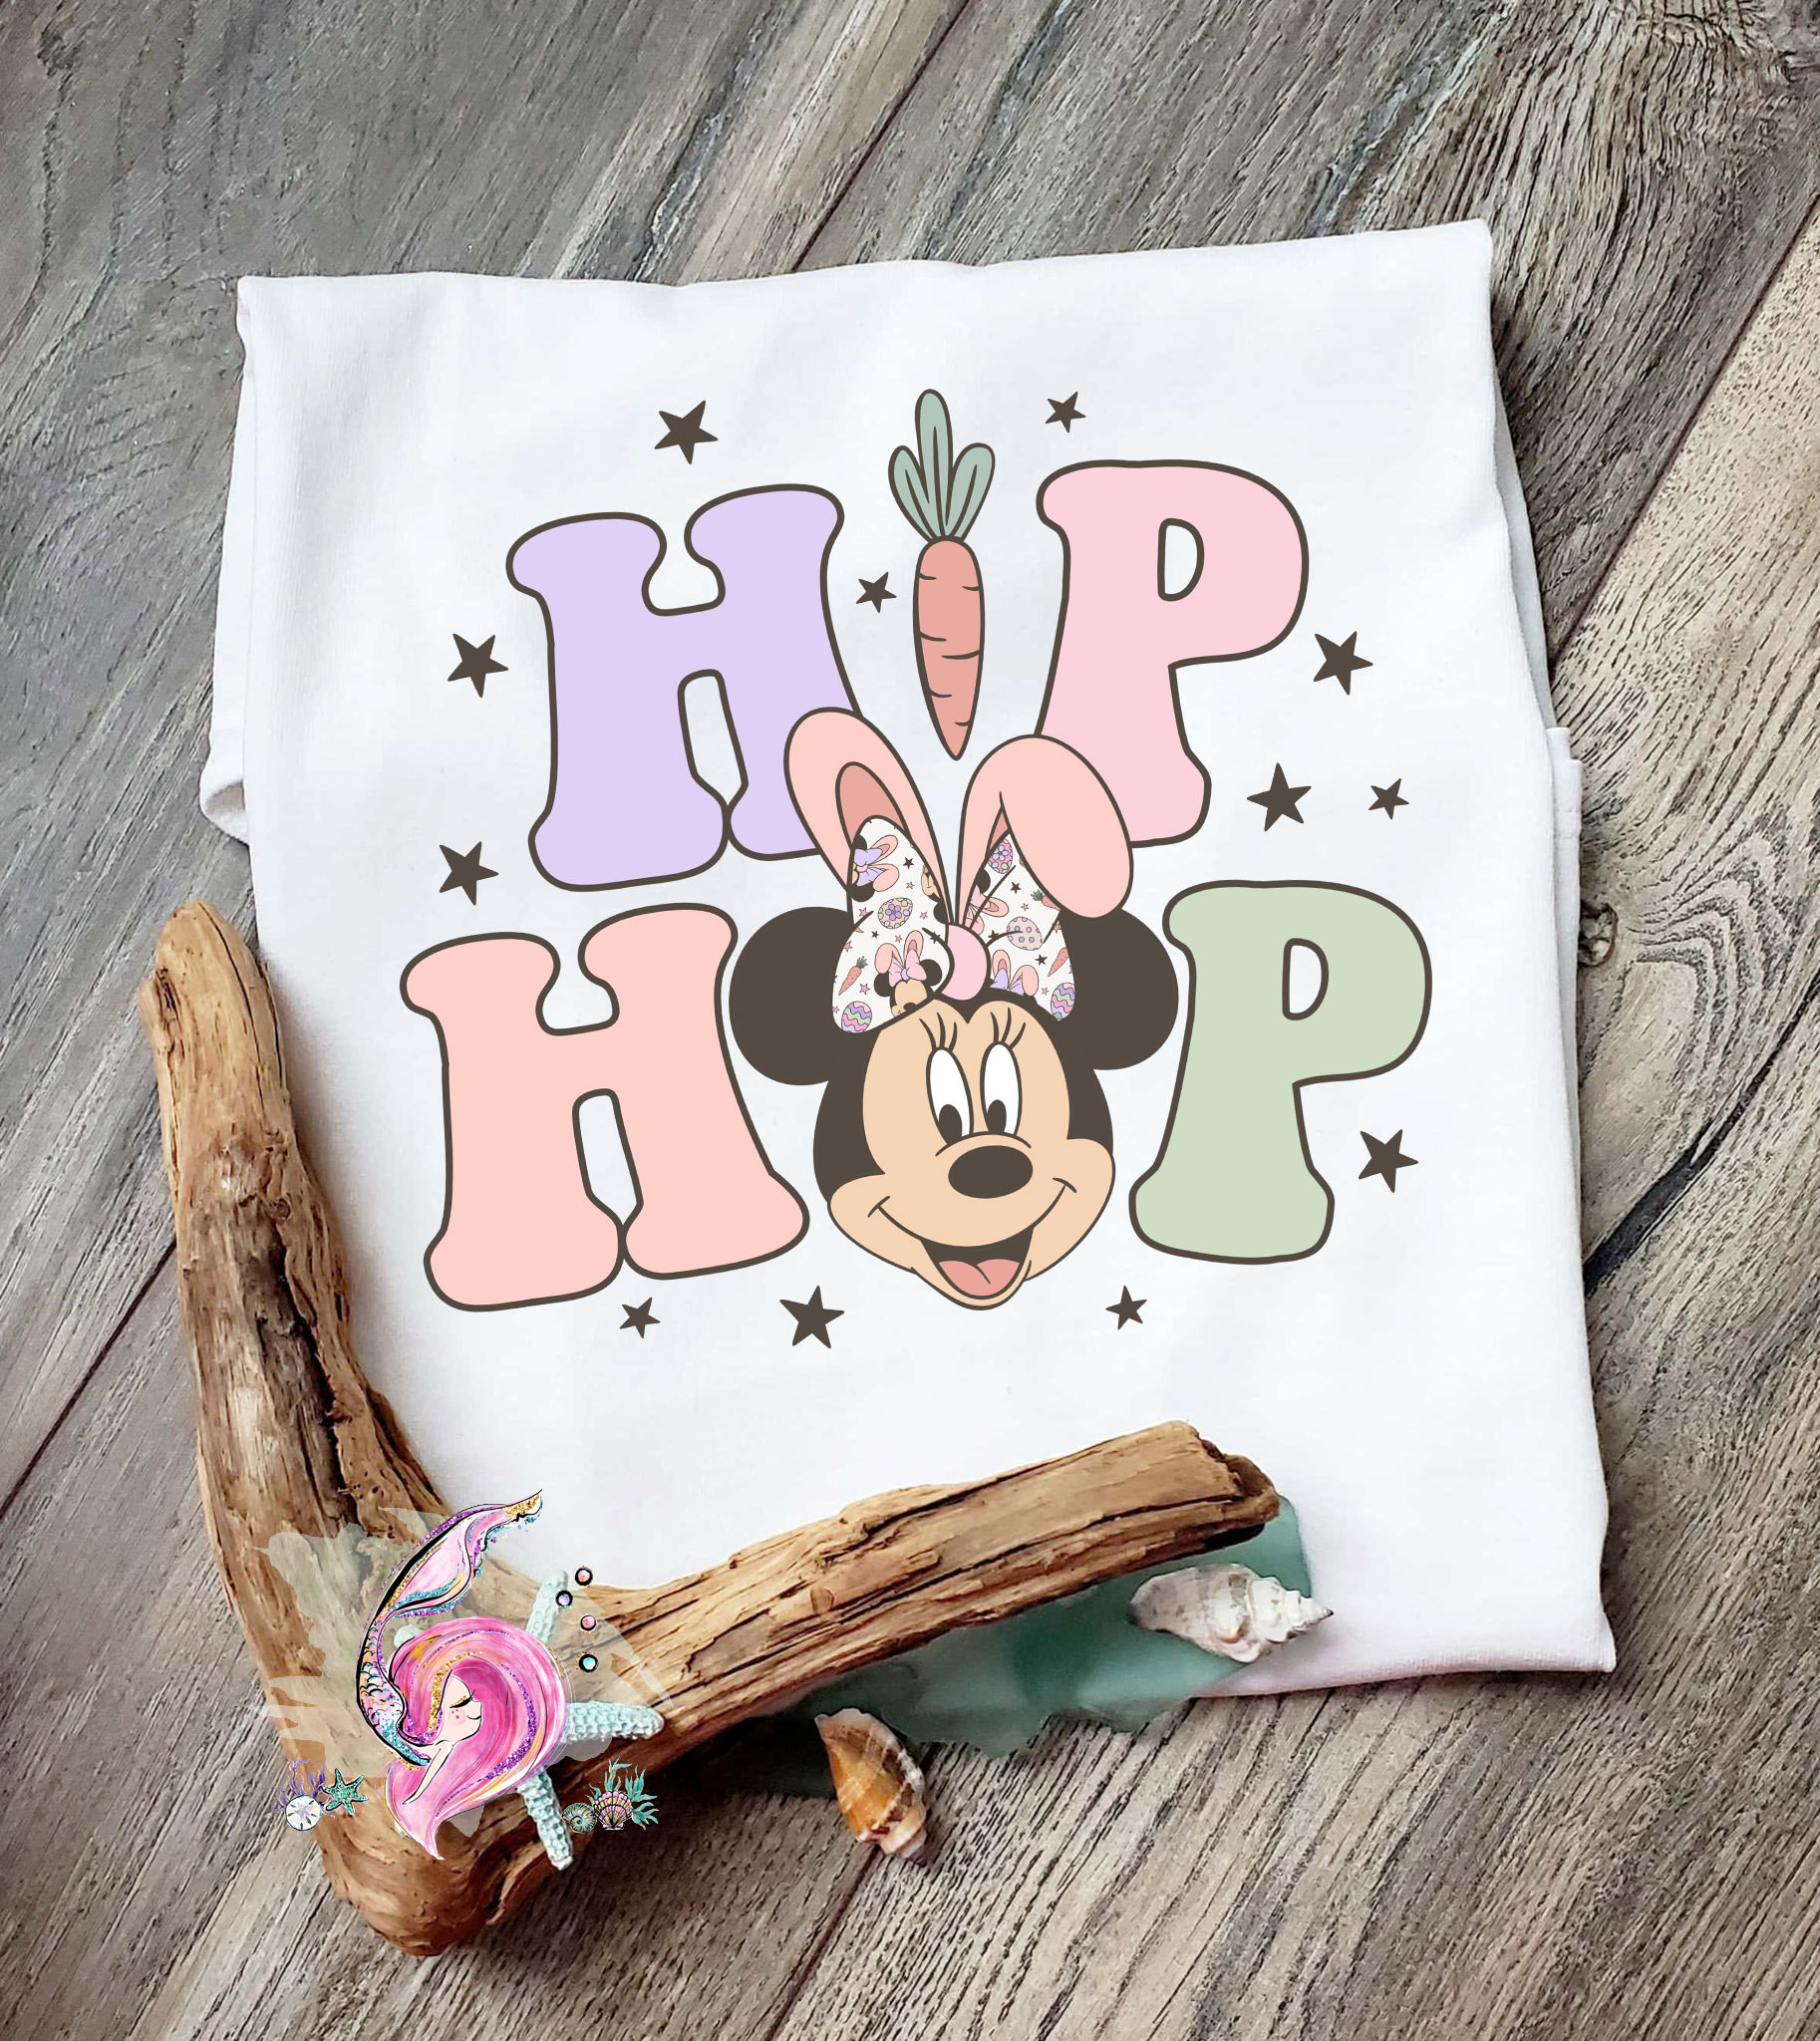 Cheap Minnie And Mickey Mouse Disney Easter Shirts, Easter Gifts For Adults  - Allsoymade